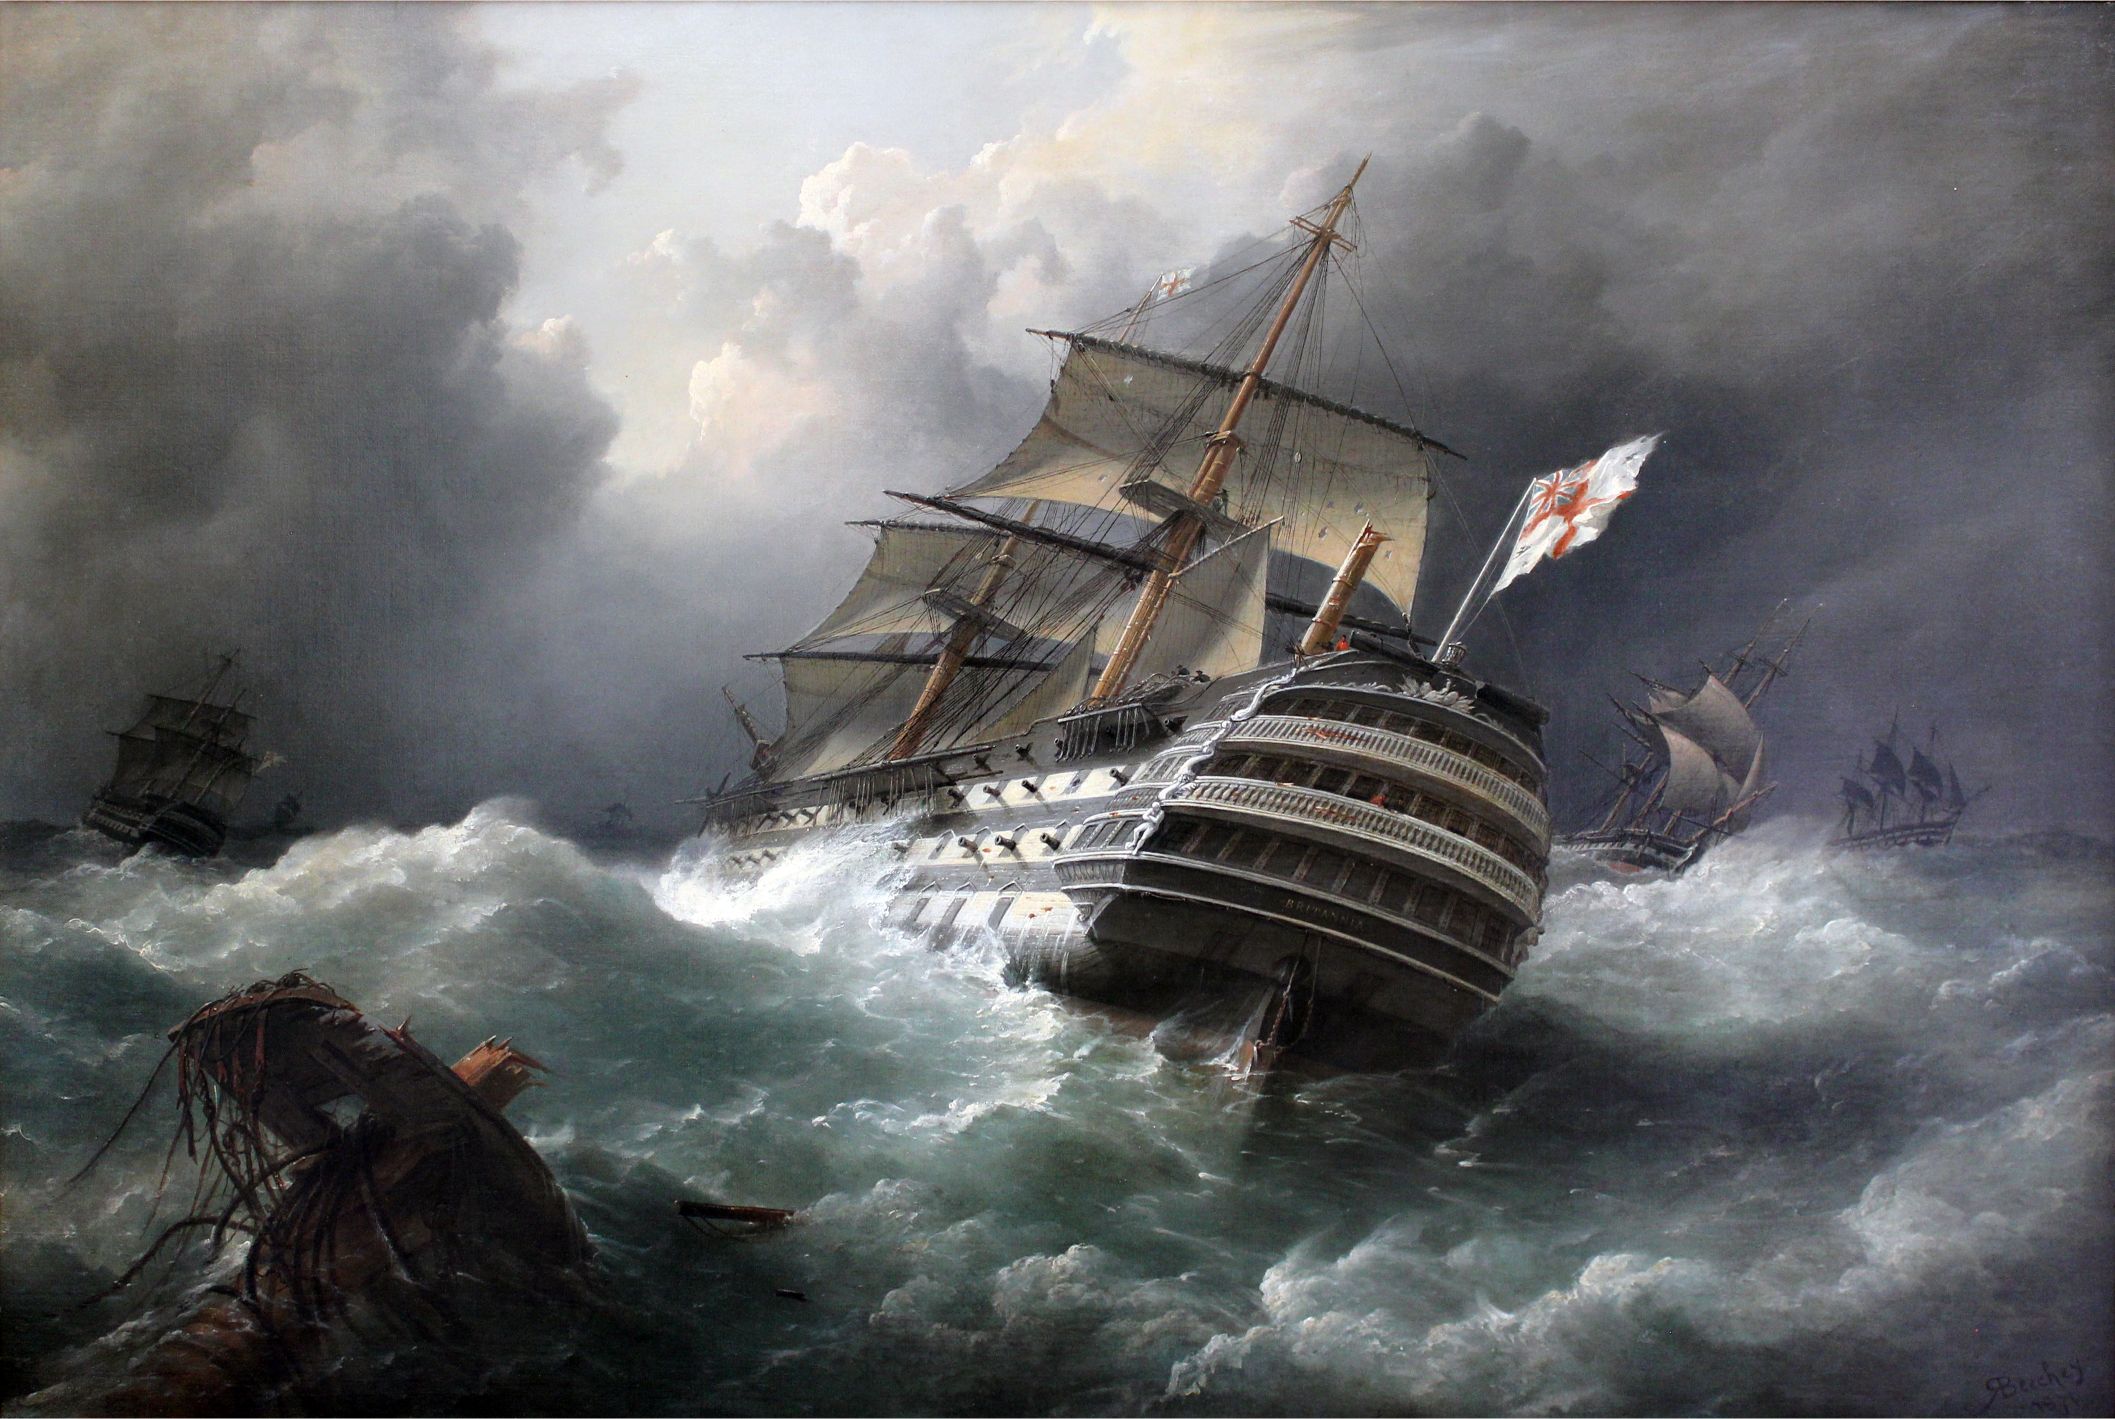 large boat in rough waters near a shipwreck